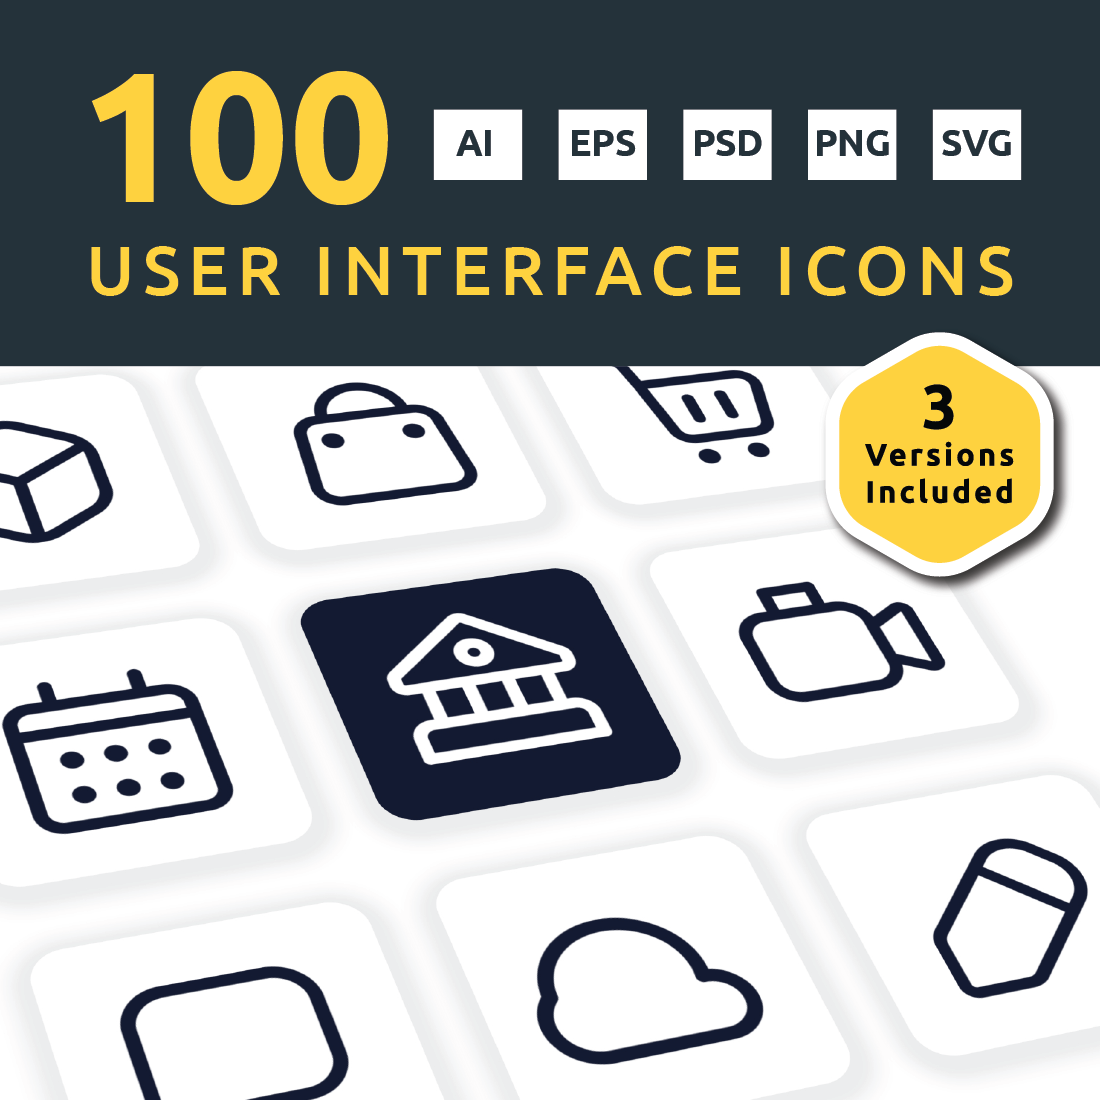 100 Standard User Interface Icons - 3 Style Included cover image.